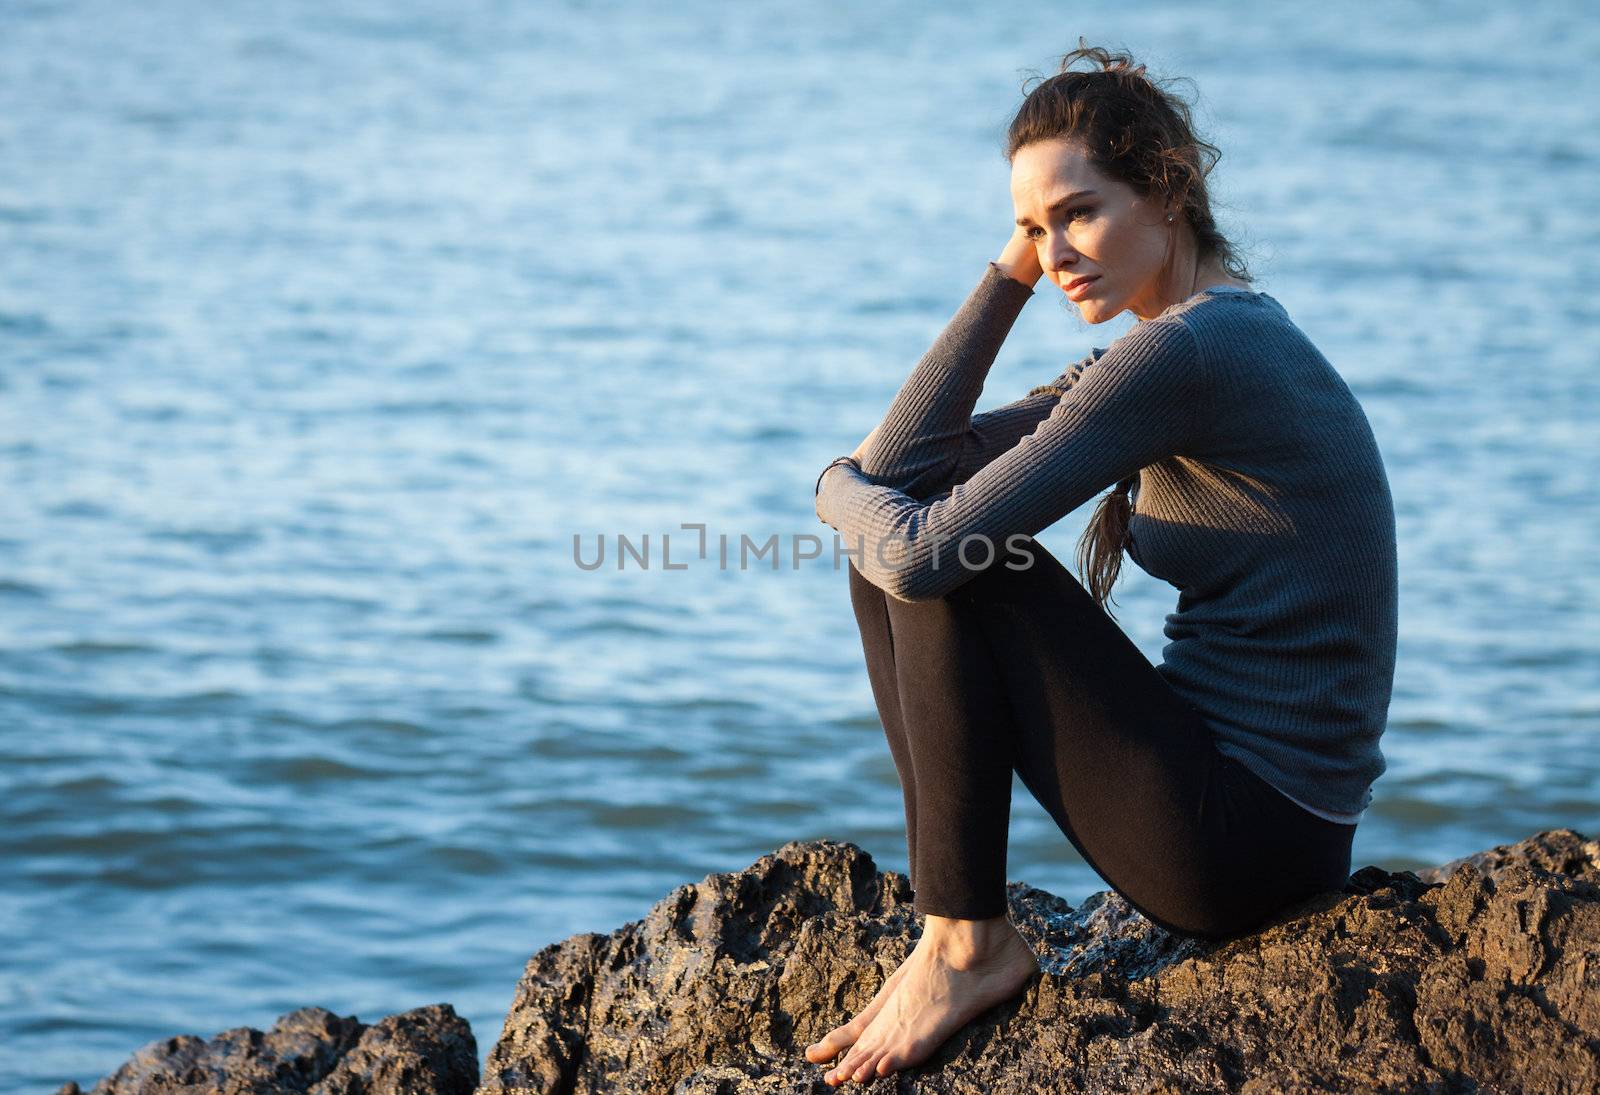 Sad and depressed woman sitting by the ocean